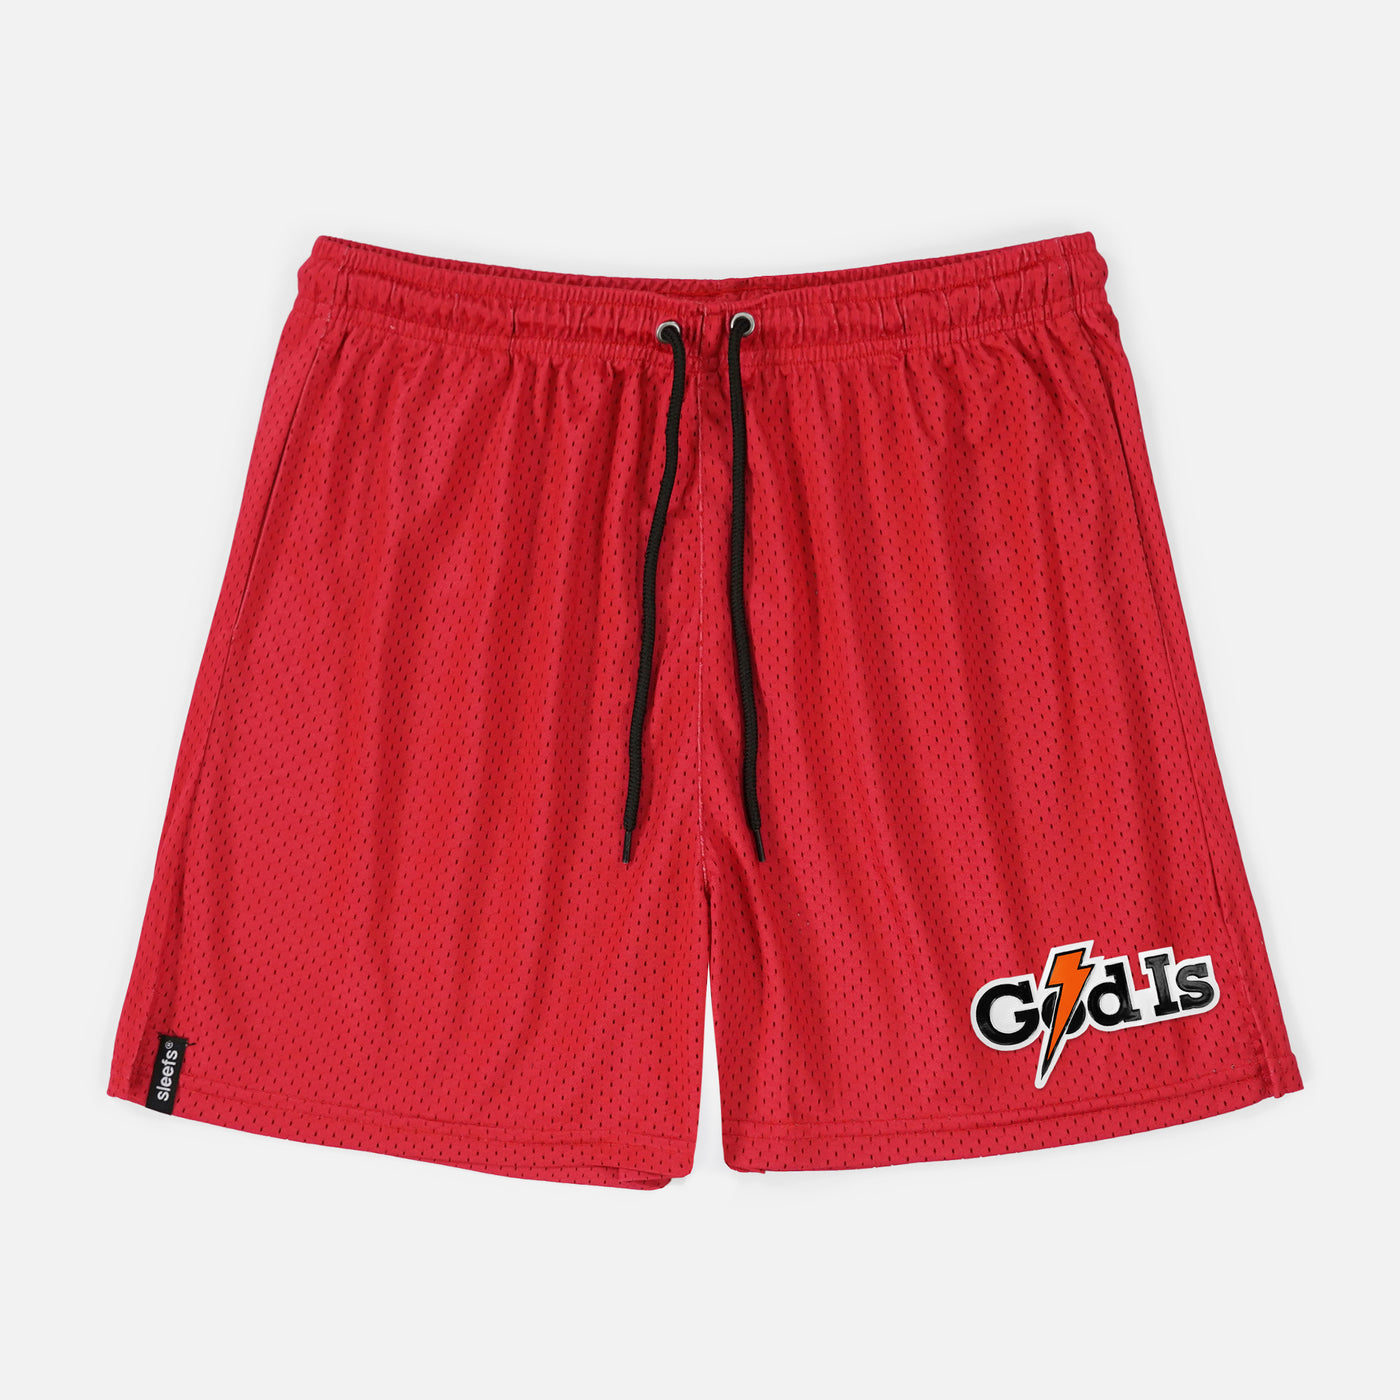 God Is Patch Shorts - 7"